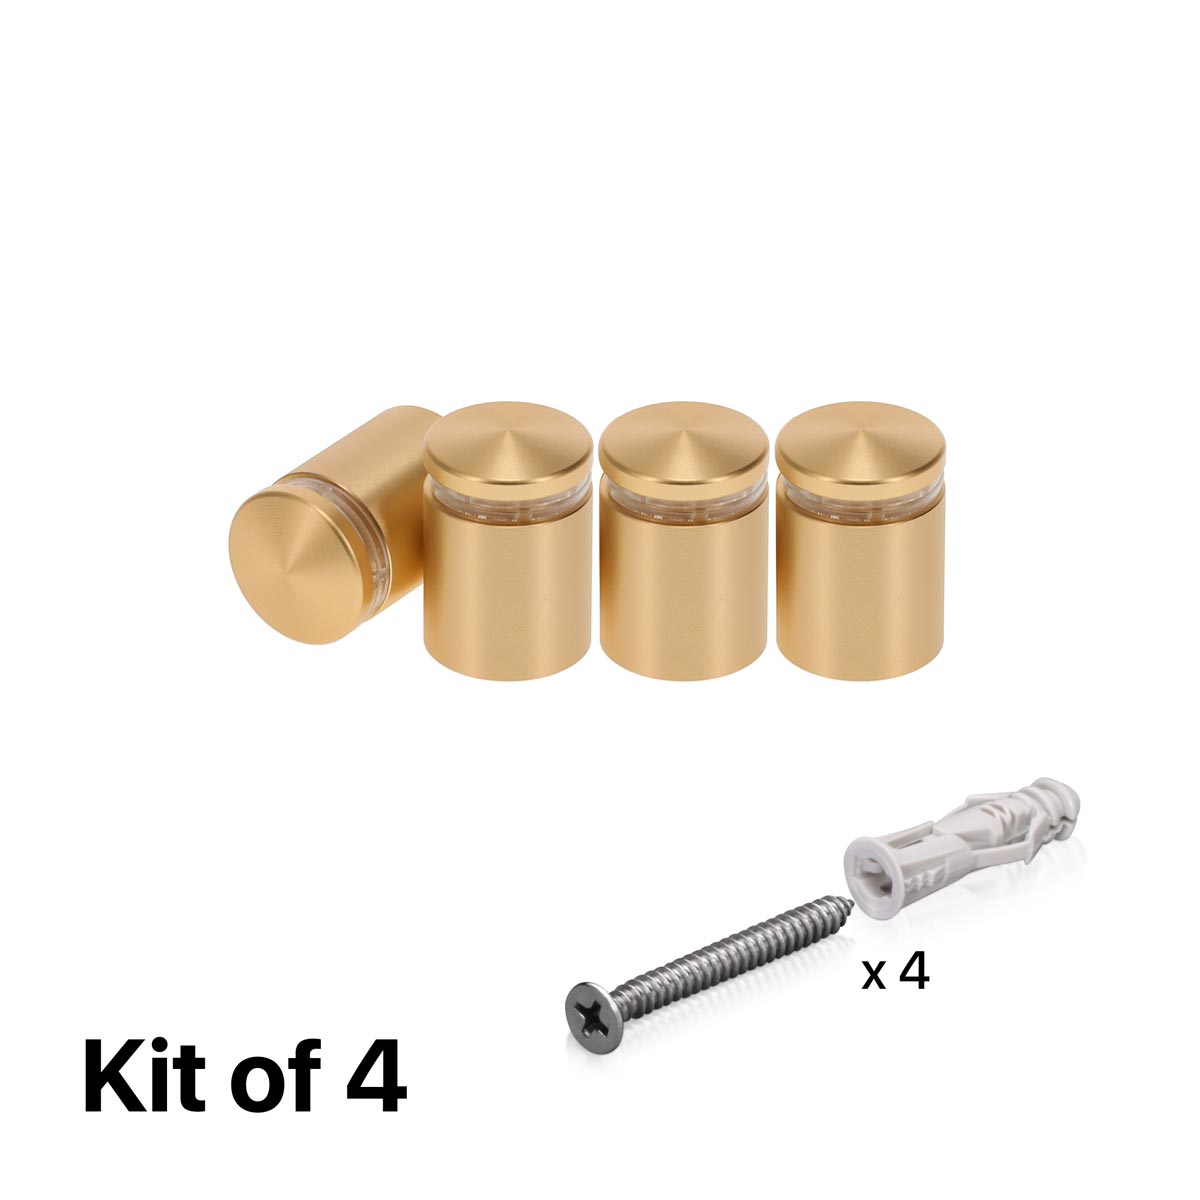 (Set of 4) 3/4'' Diameter X 3/4'' Barrel Length, Alumi. Rounded Head Standoffs, Matte Champagne Anodized Finish Standoff with (4) 2216Z Screws and (4) LANC1 Anchors for concrete or drywall (For In / Out use) [Required Material Hole Size: 7/16'']